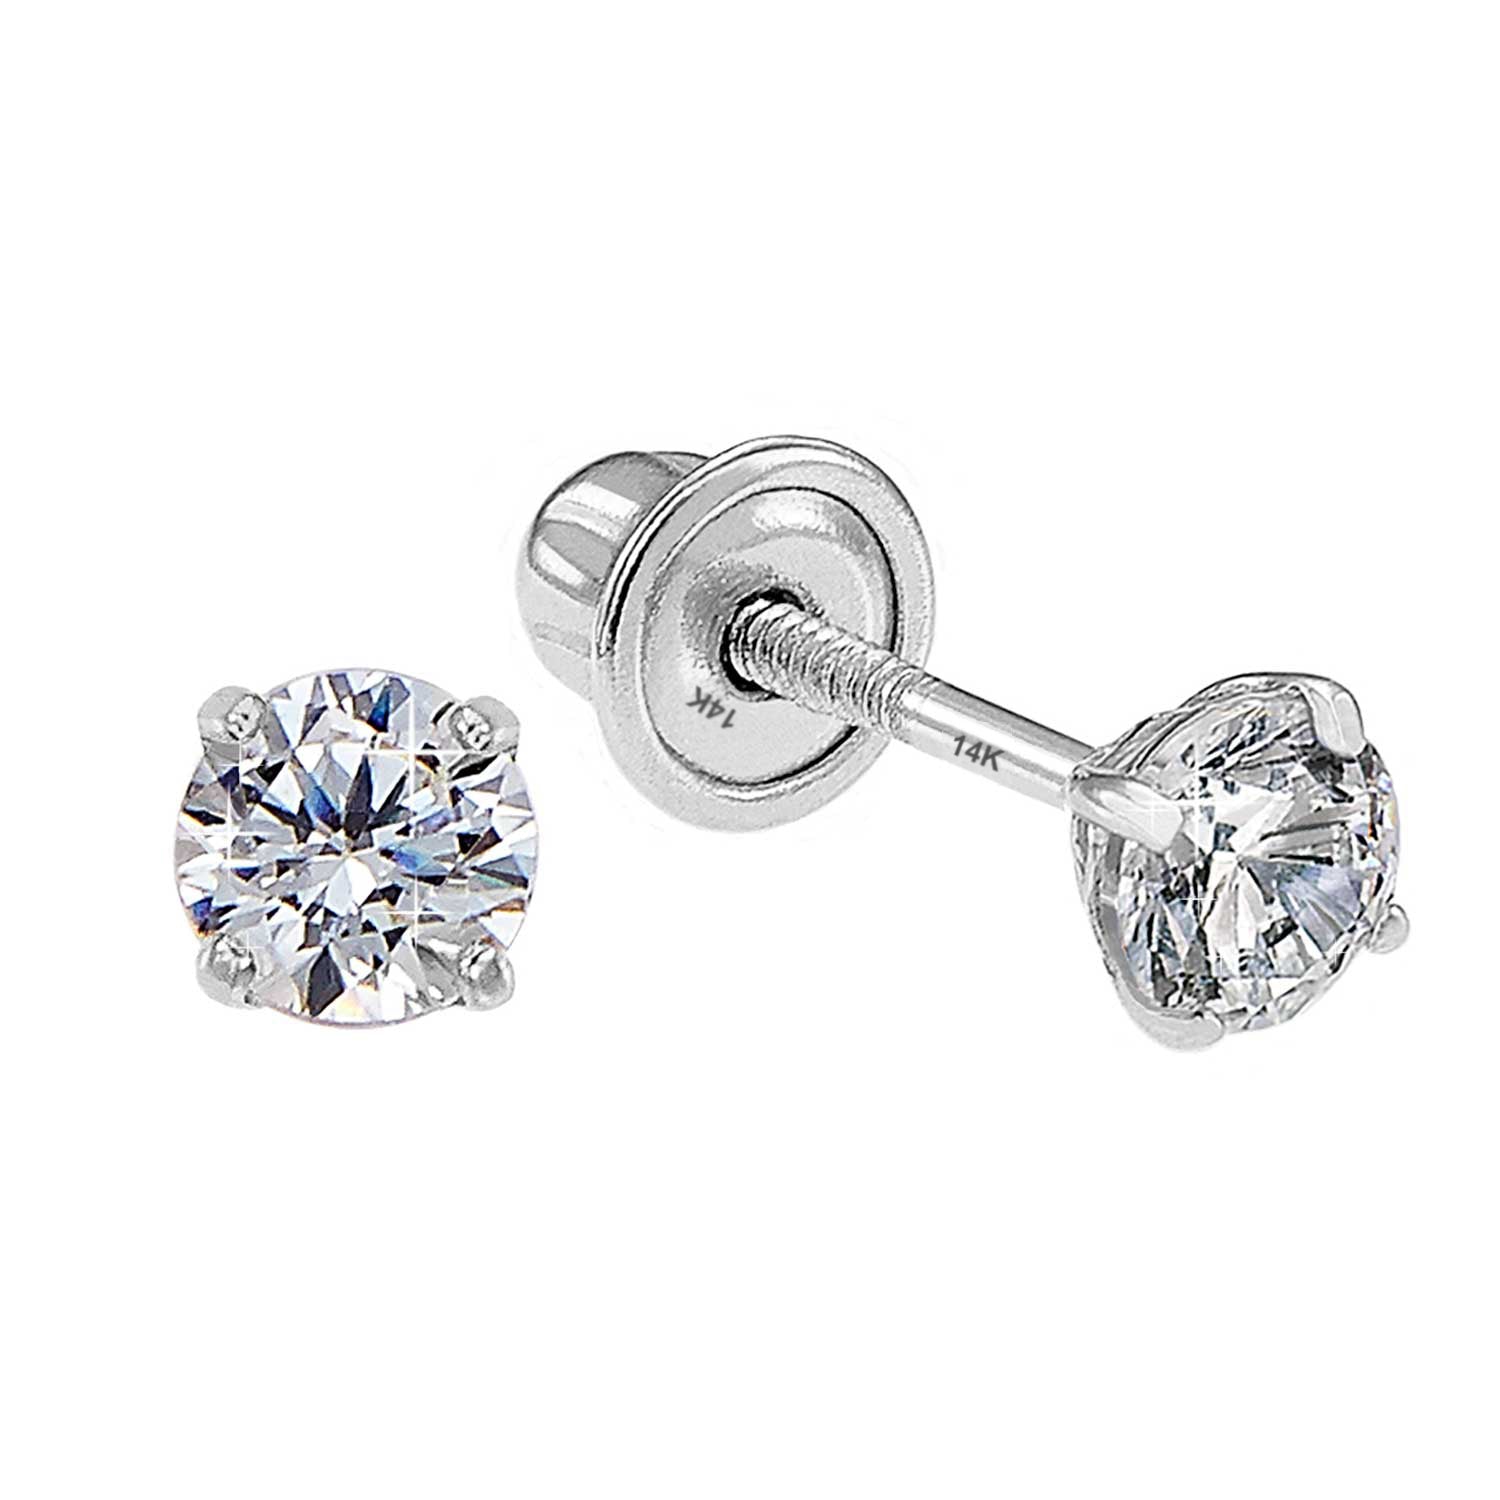 14k White Gold Classic Solitaire Stud Earrings, Screwback, #42677